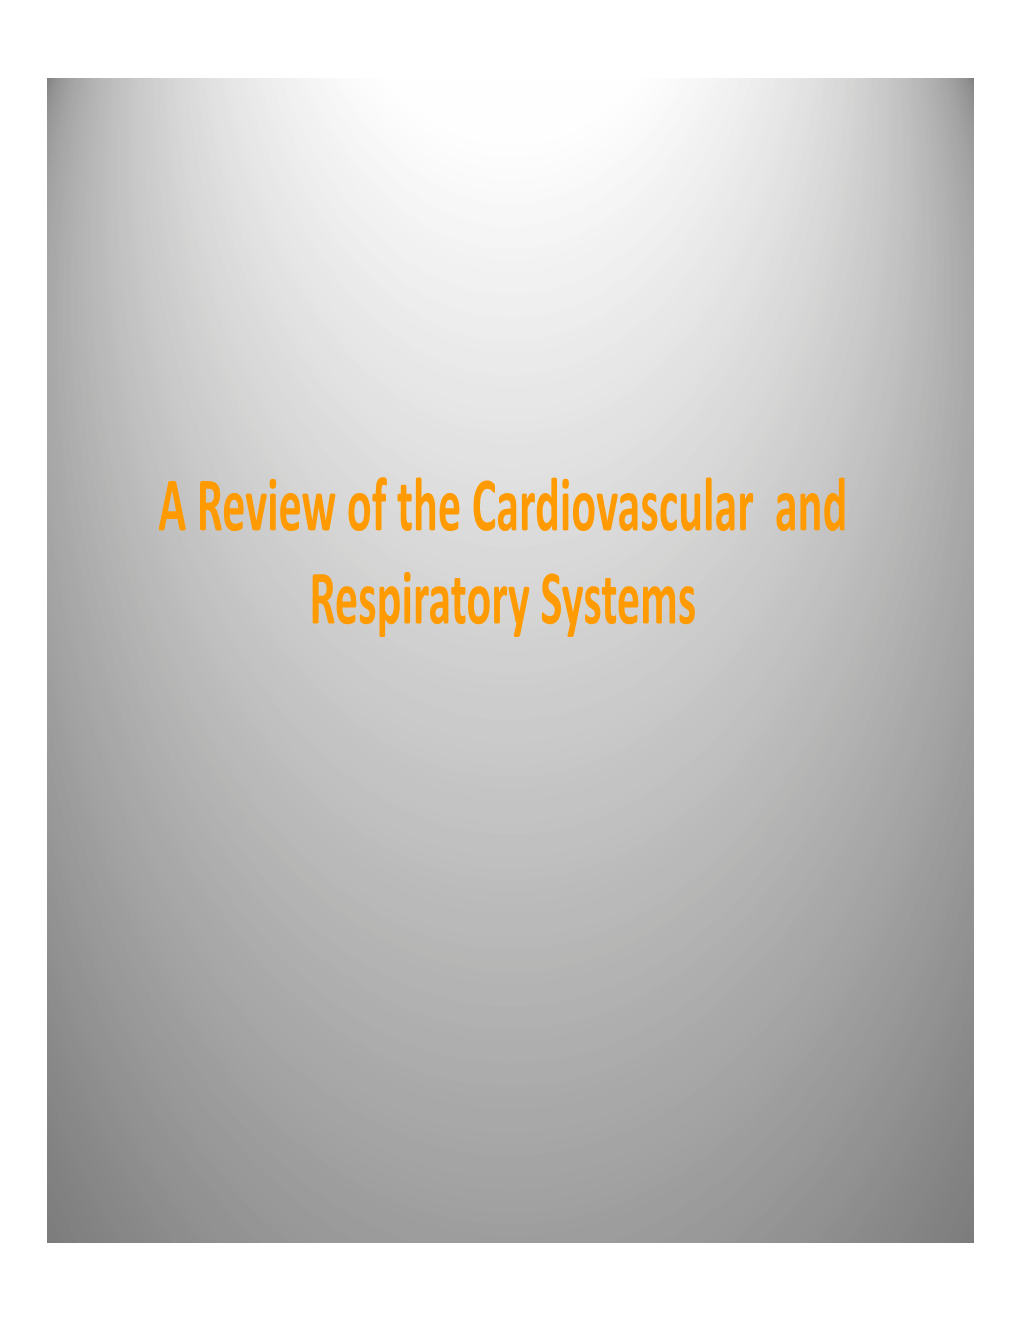 A Review of the Cardiovascular and R I S Respiratory Systems